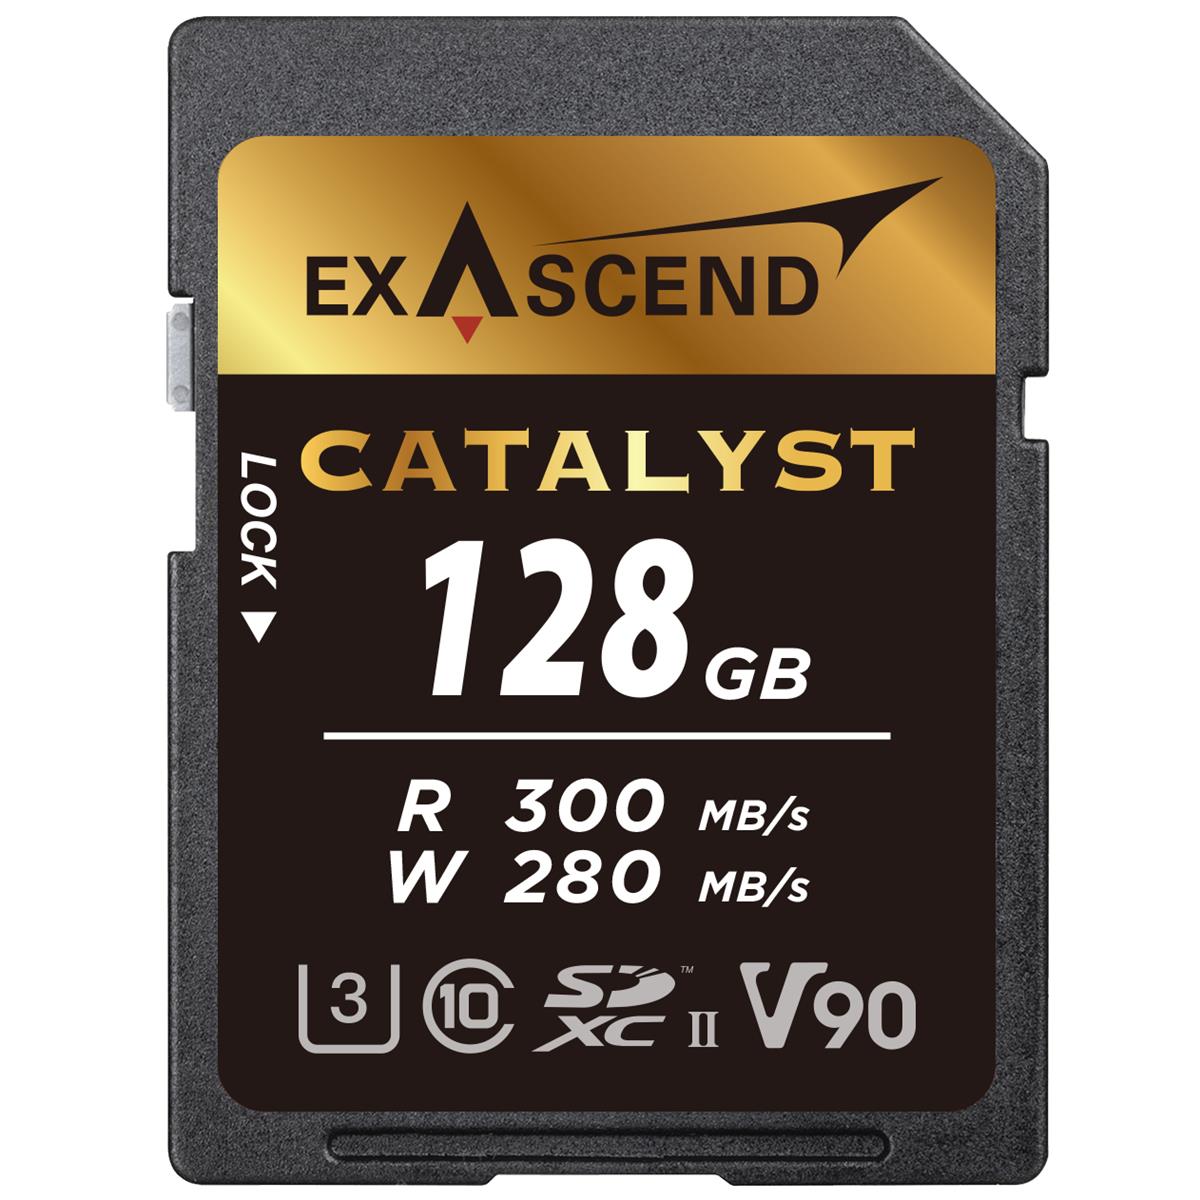 Image of Exascend Catalyst 128GB UHS-II V90 SDXC Memory Card